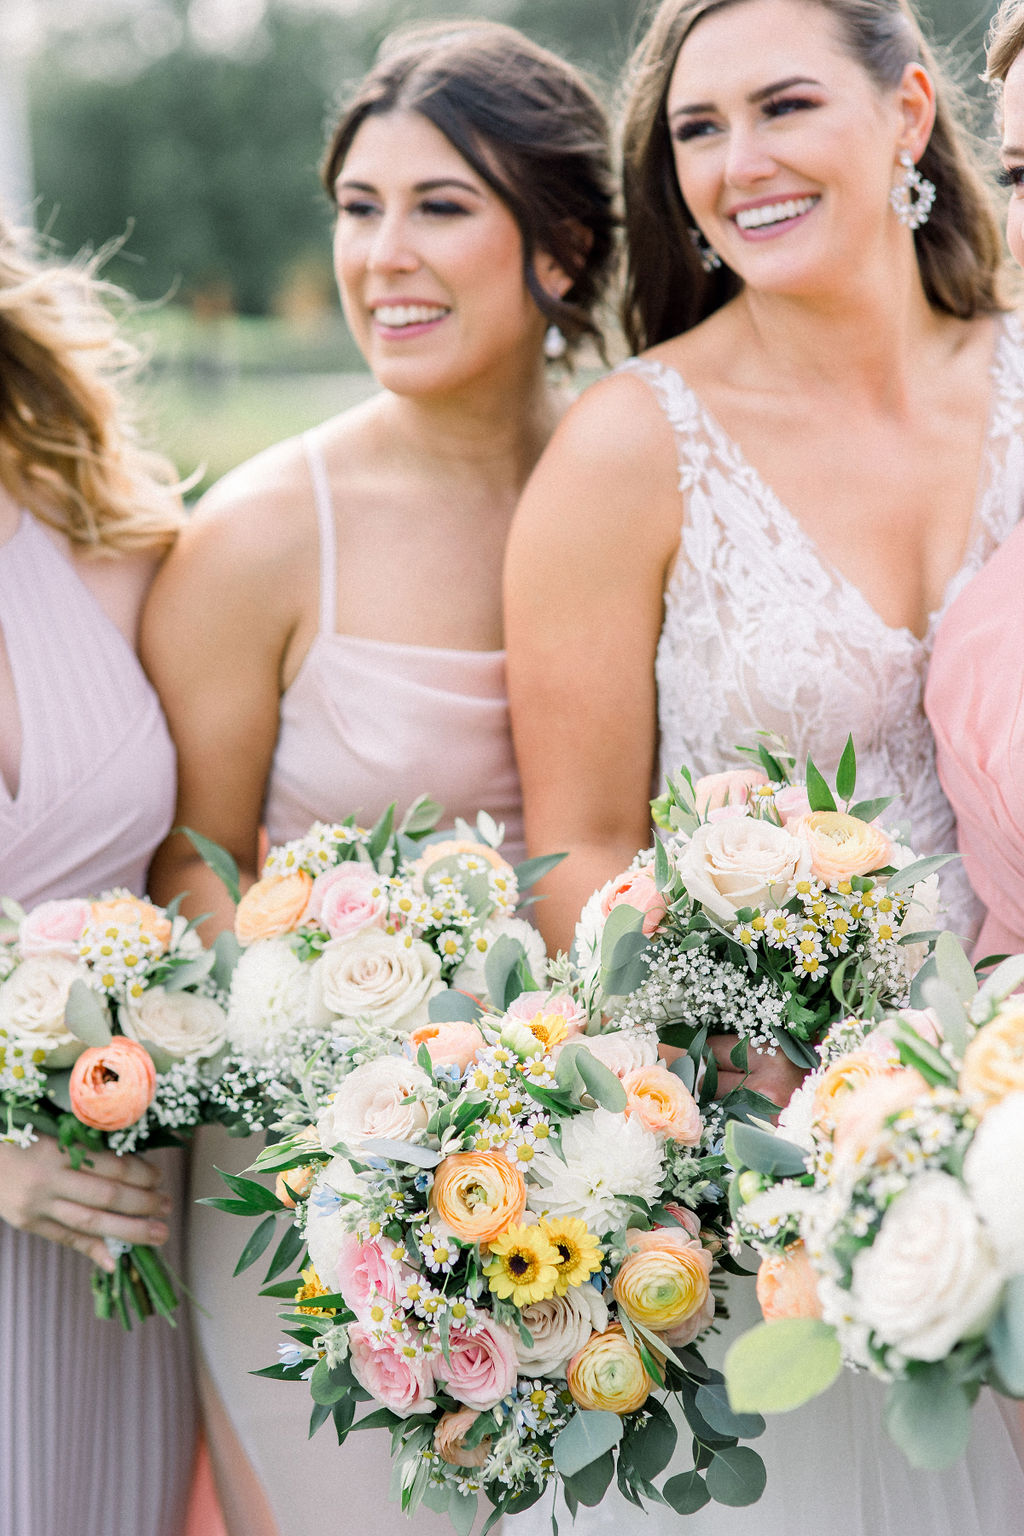 Floral Reef Designs Ottawa Wedding Florist - Amy Pinder Photography - Stonefields Estate wedding - close up of soft warm pastel bouquets